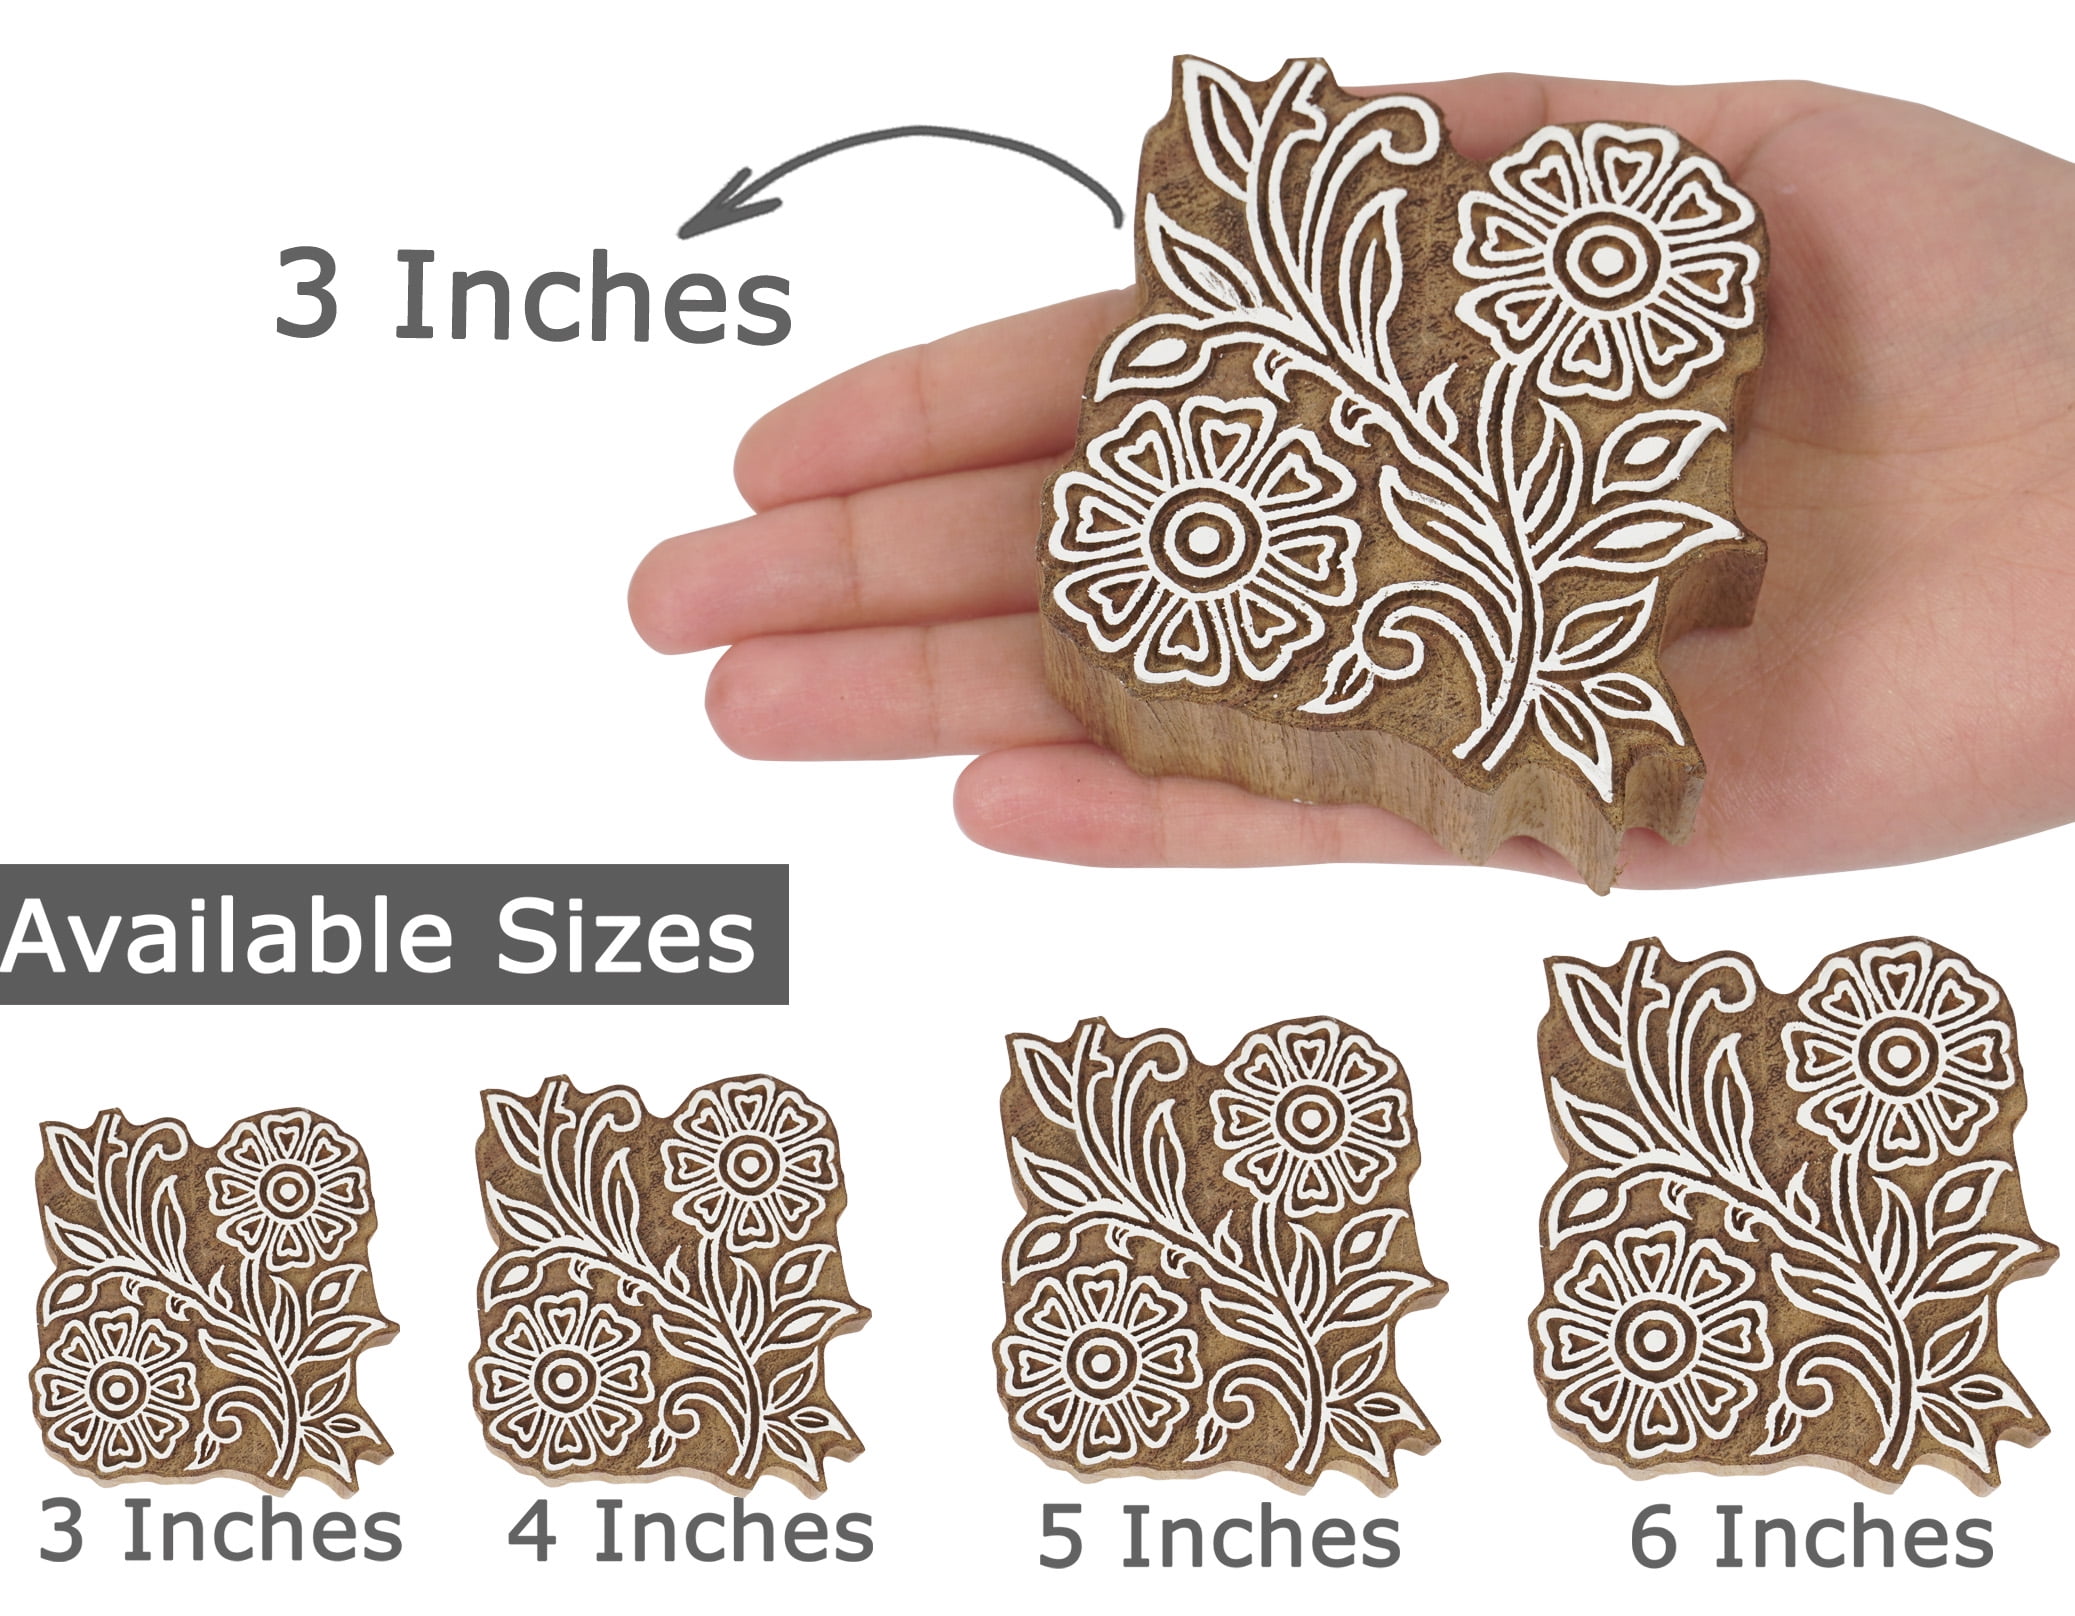 a.blocks arts Wooden Printing Hand Block for Stamp/Crafts Textile  Printing/Making Pottery - Set of 3 Piece, Size - 2.3 inch, 3 inch, 2.3 inch  : : Toys & Games